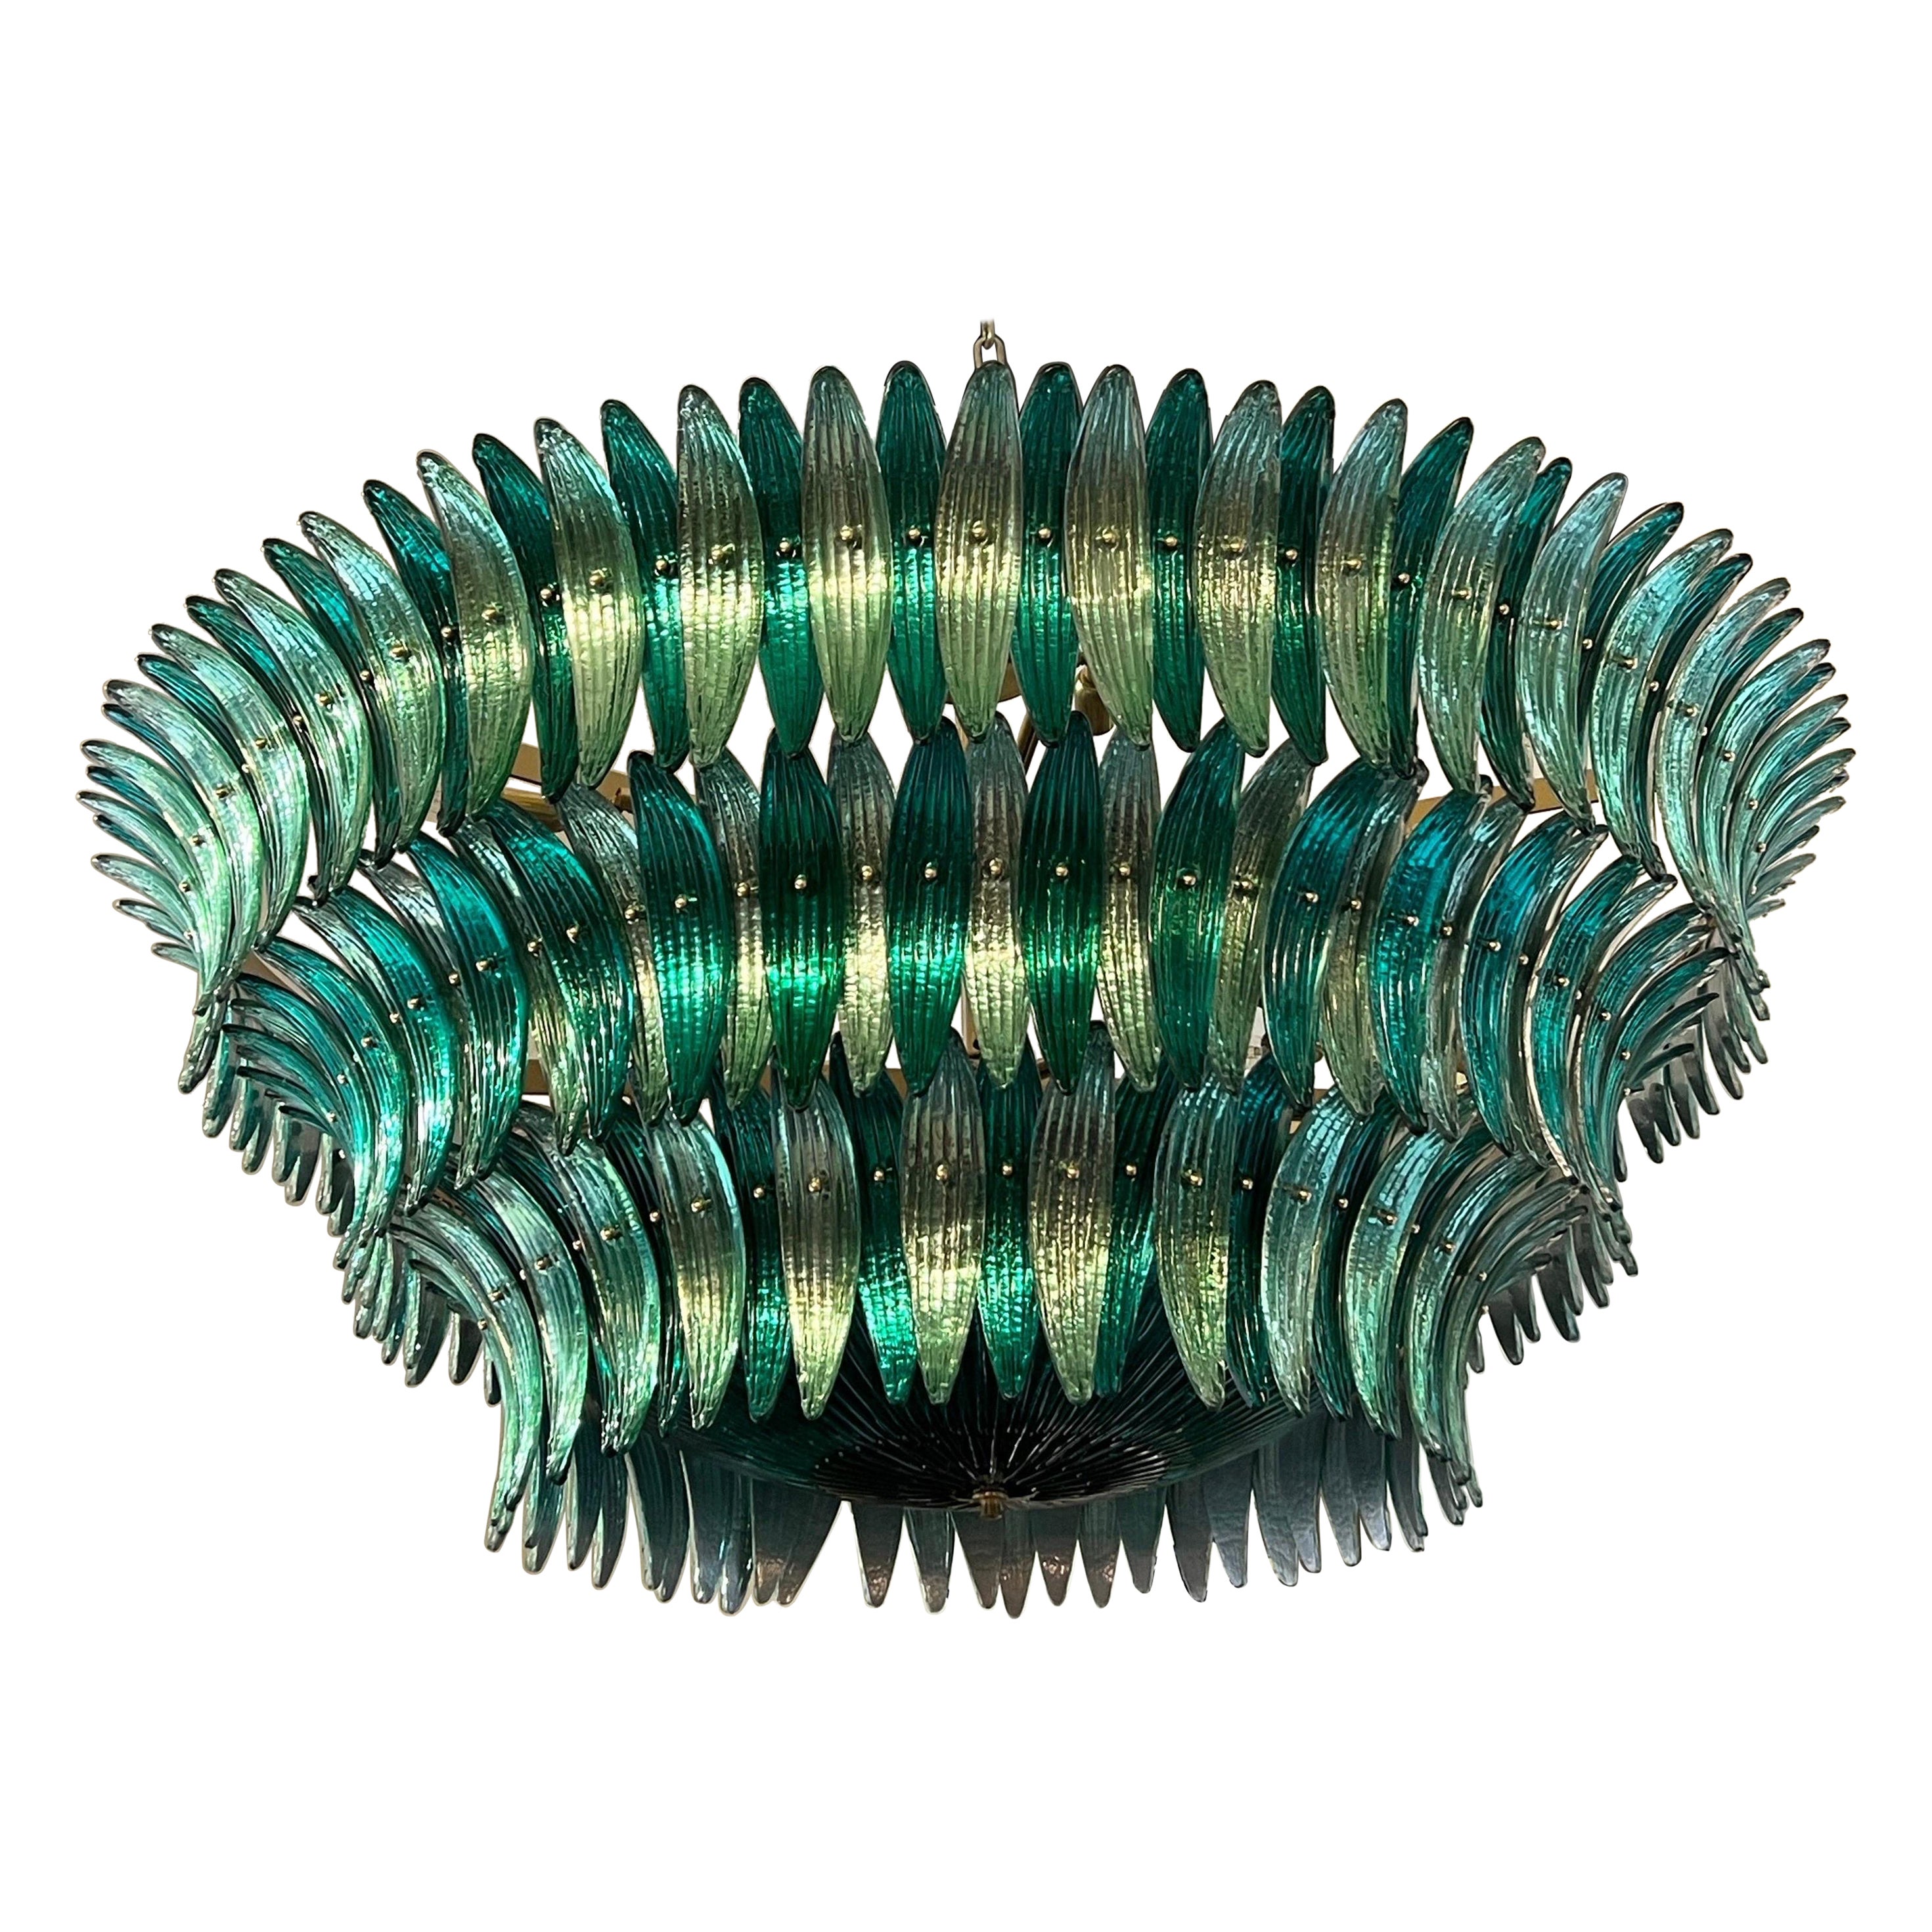 Two Tones Mirrored Green Murano Glass Leaves Chandelier 1980 For Sale